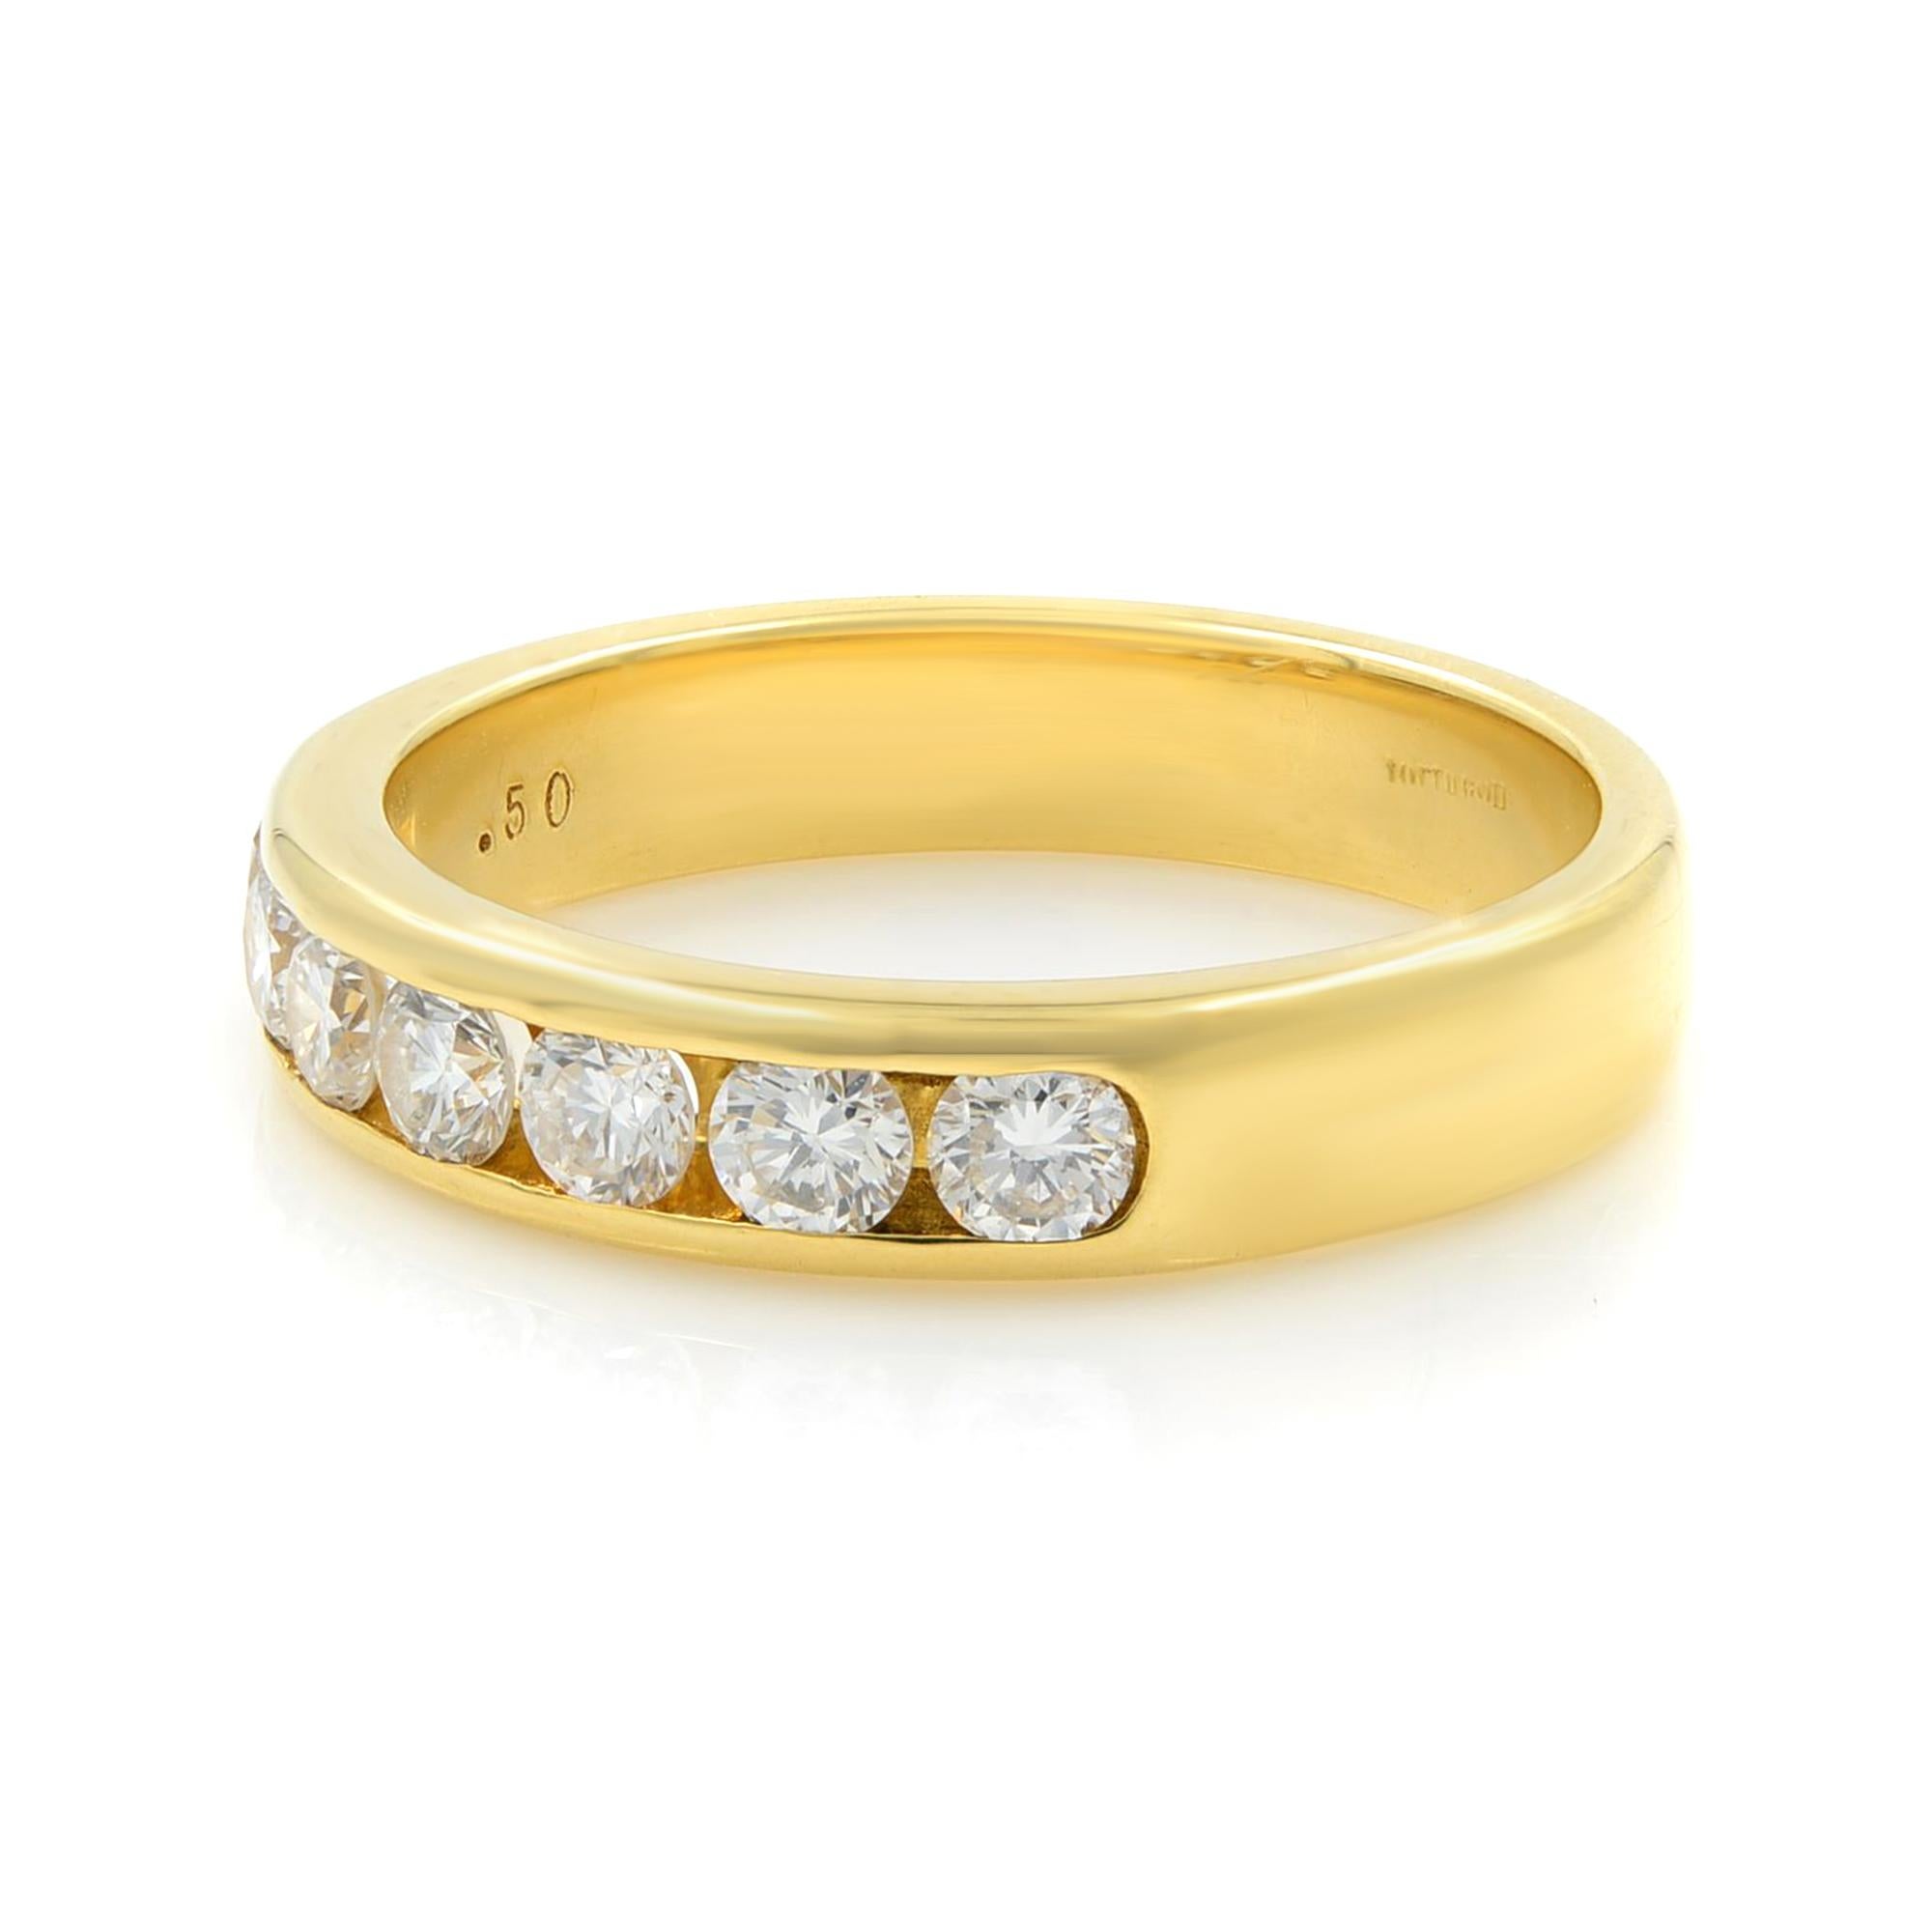 This is a super, newly-crafted diamond wedding band rendered in rich 18k yellow gold. Adorned with channel set seven perfectly matched high-color, high-clarity round brilliant-cut diamonds weighing 0.50 cttw. This ring can be specially ordered in